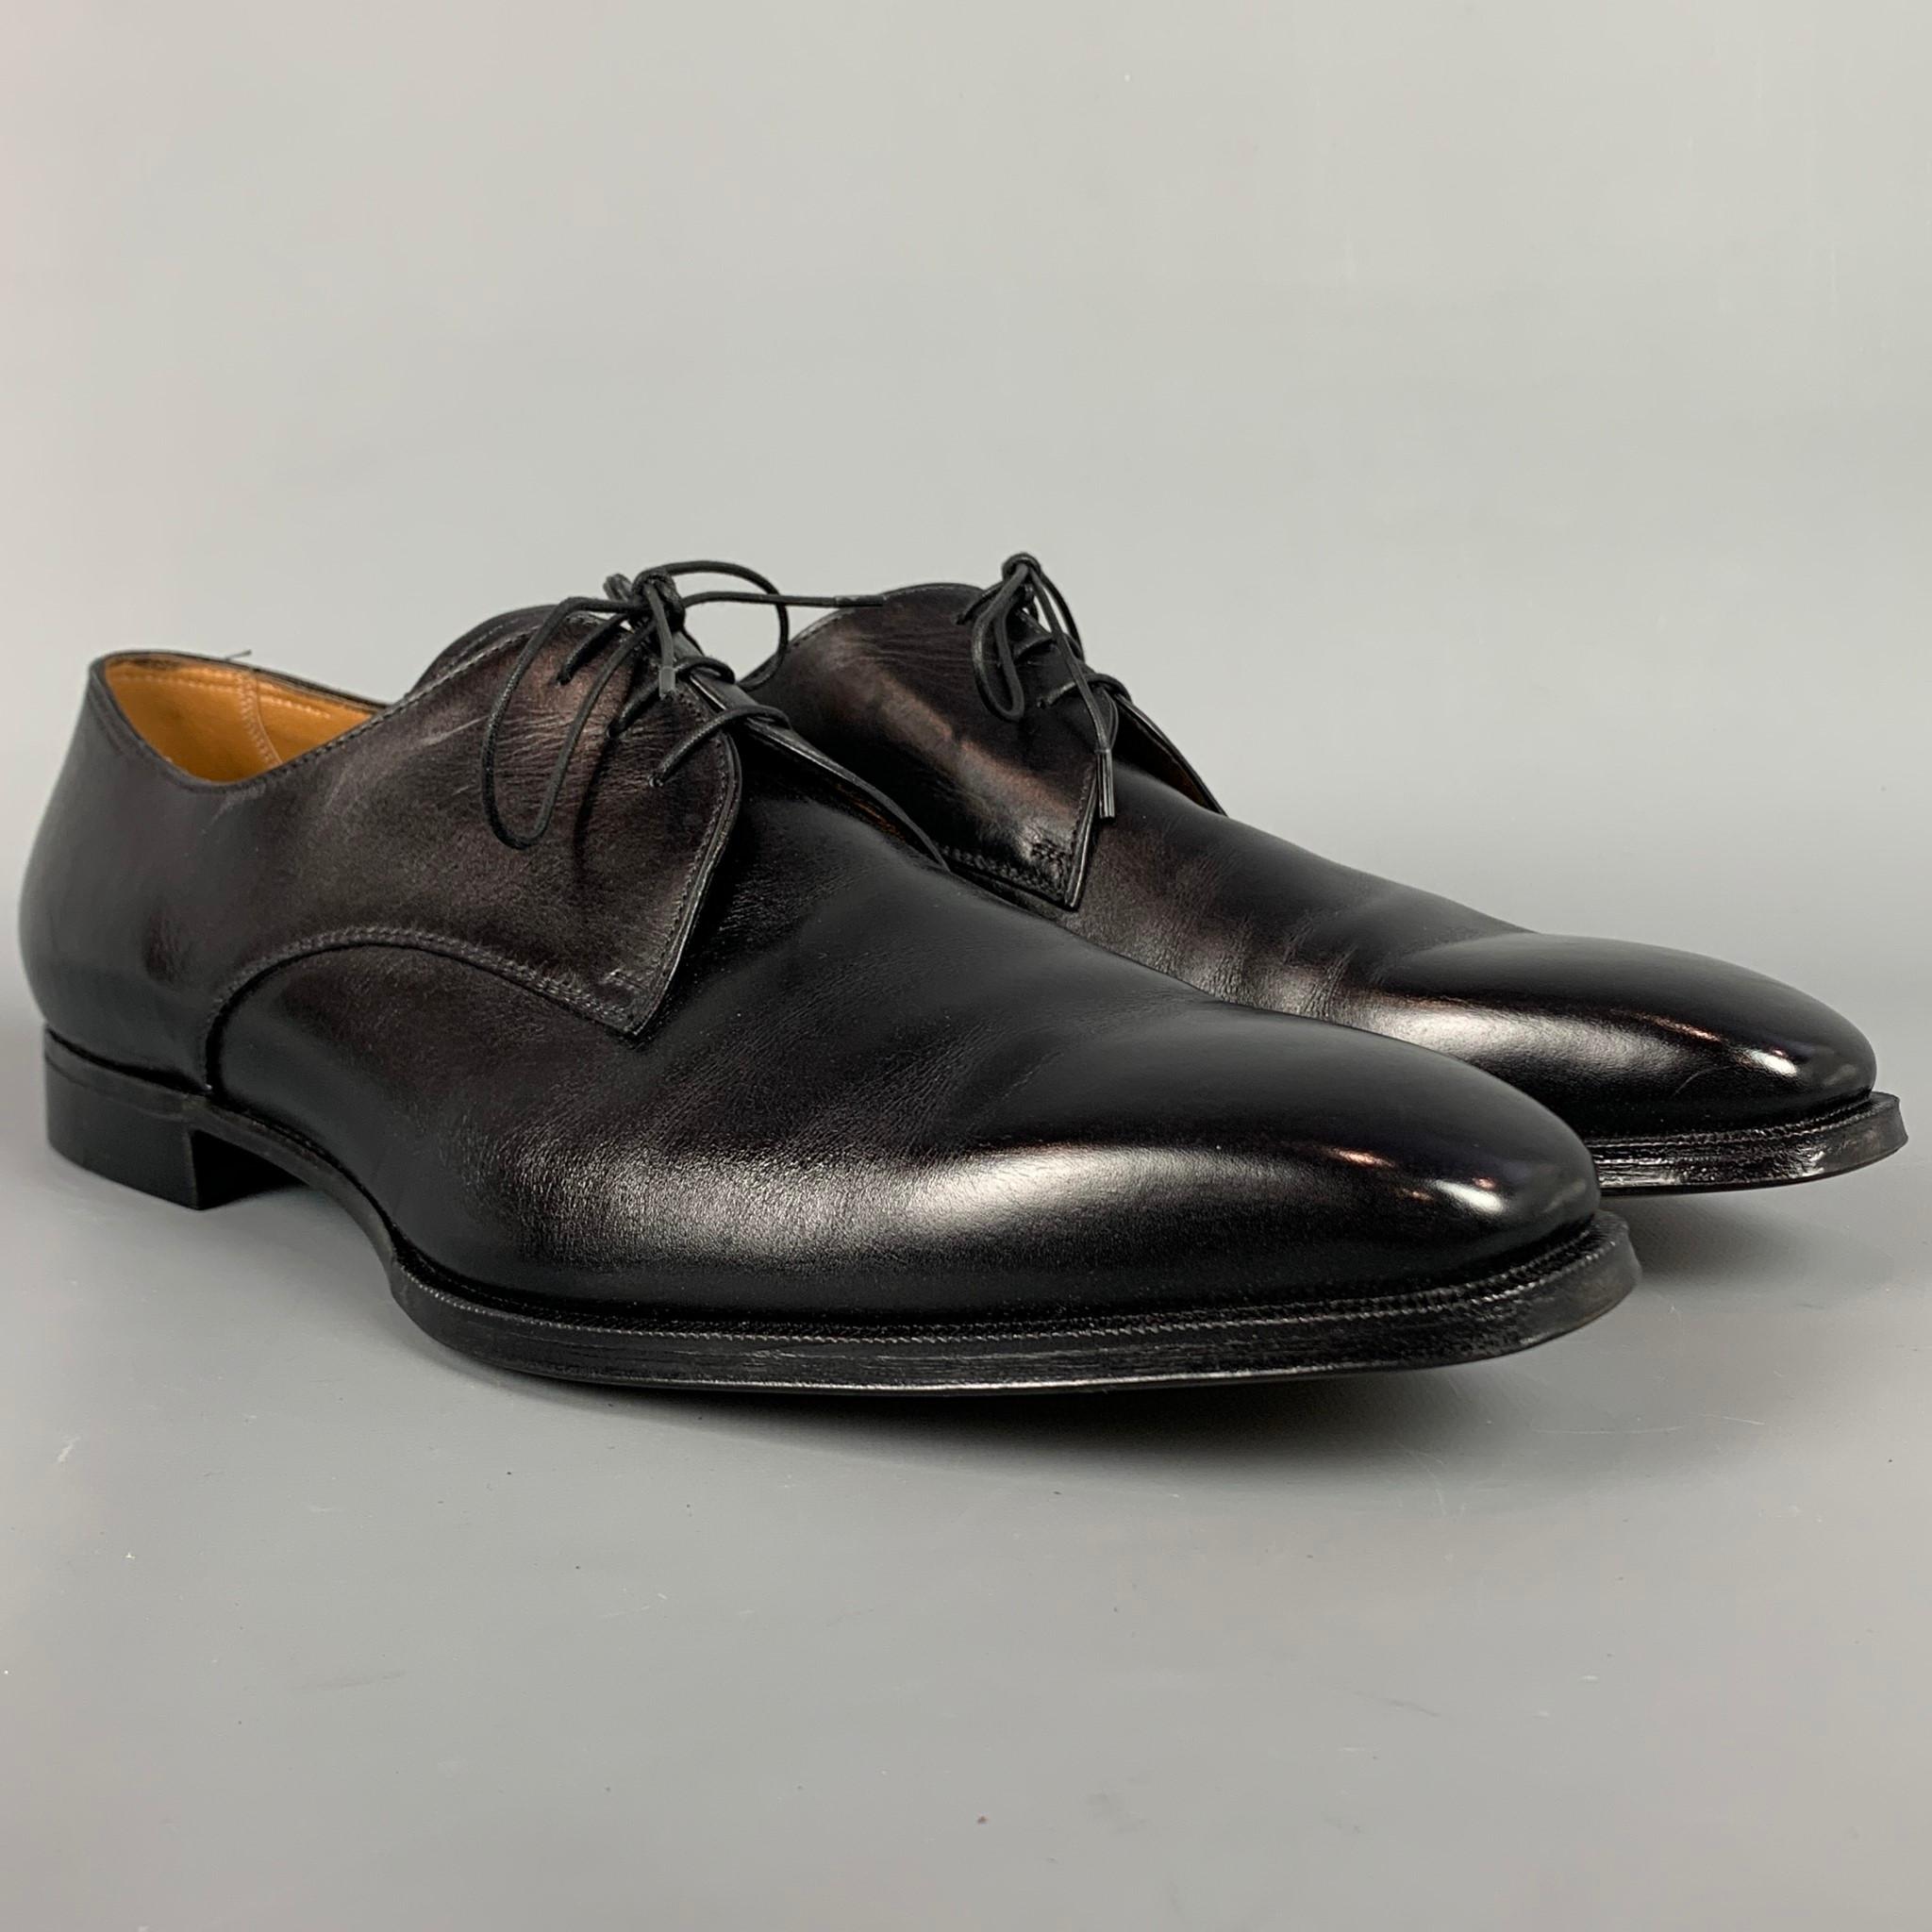 GRAVATI dress shoes comes in a black leather featuring a square toe, wooden sole, and a lace up closure. Made in Italy.  

New With Box. 
Marked: 18451 12.5M 750
Original Retail Price: $655.00

Outsole: 13 in. x 4 in. 